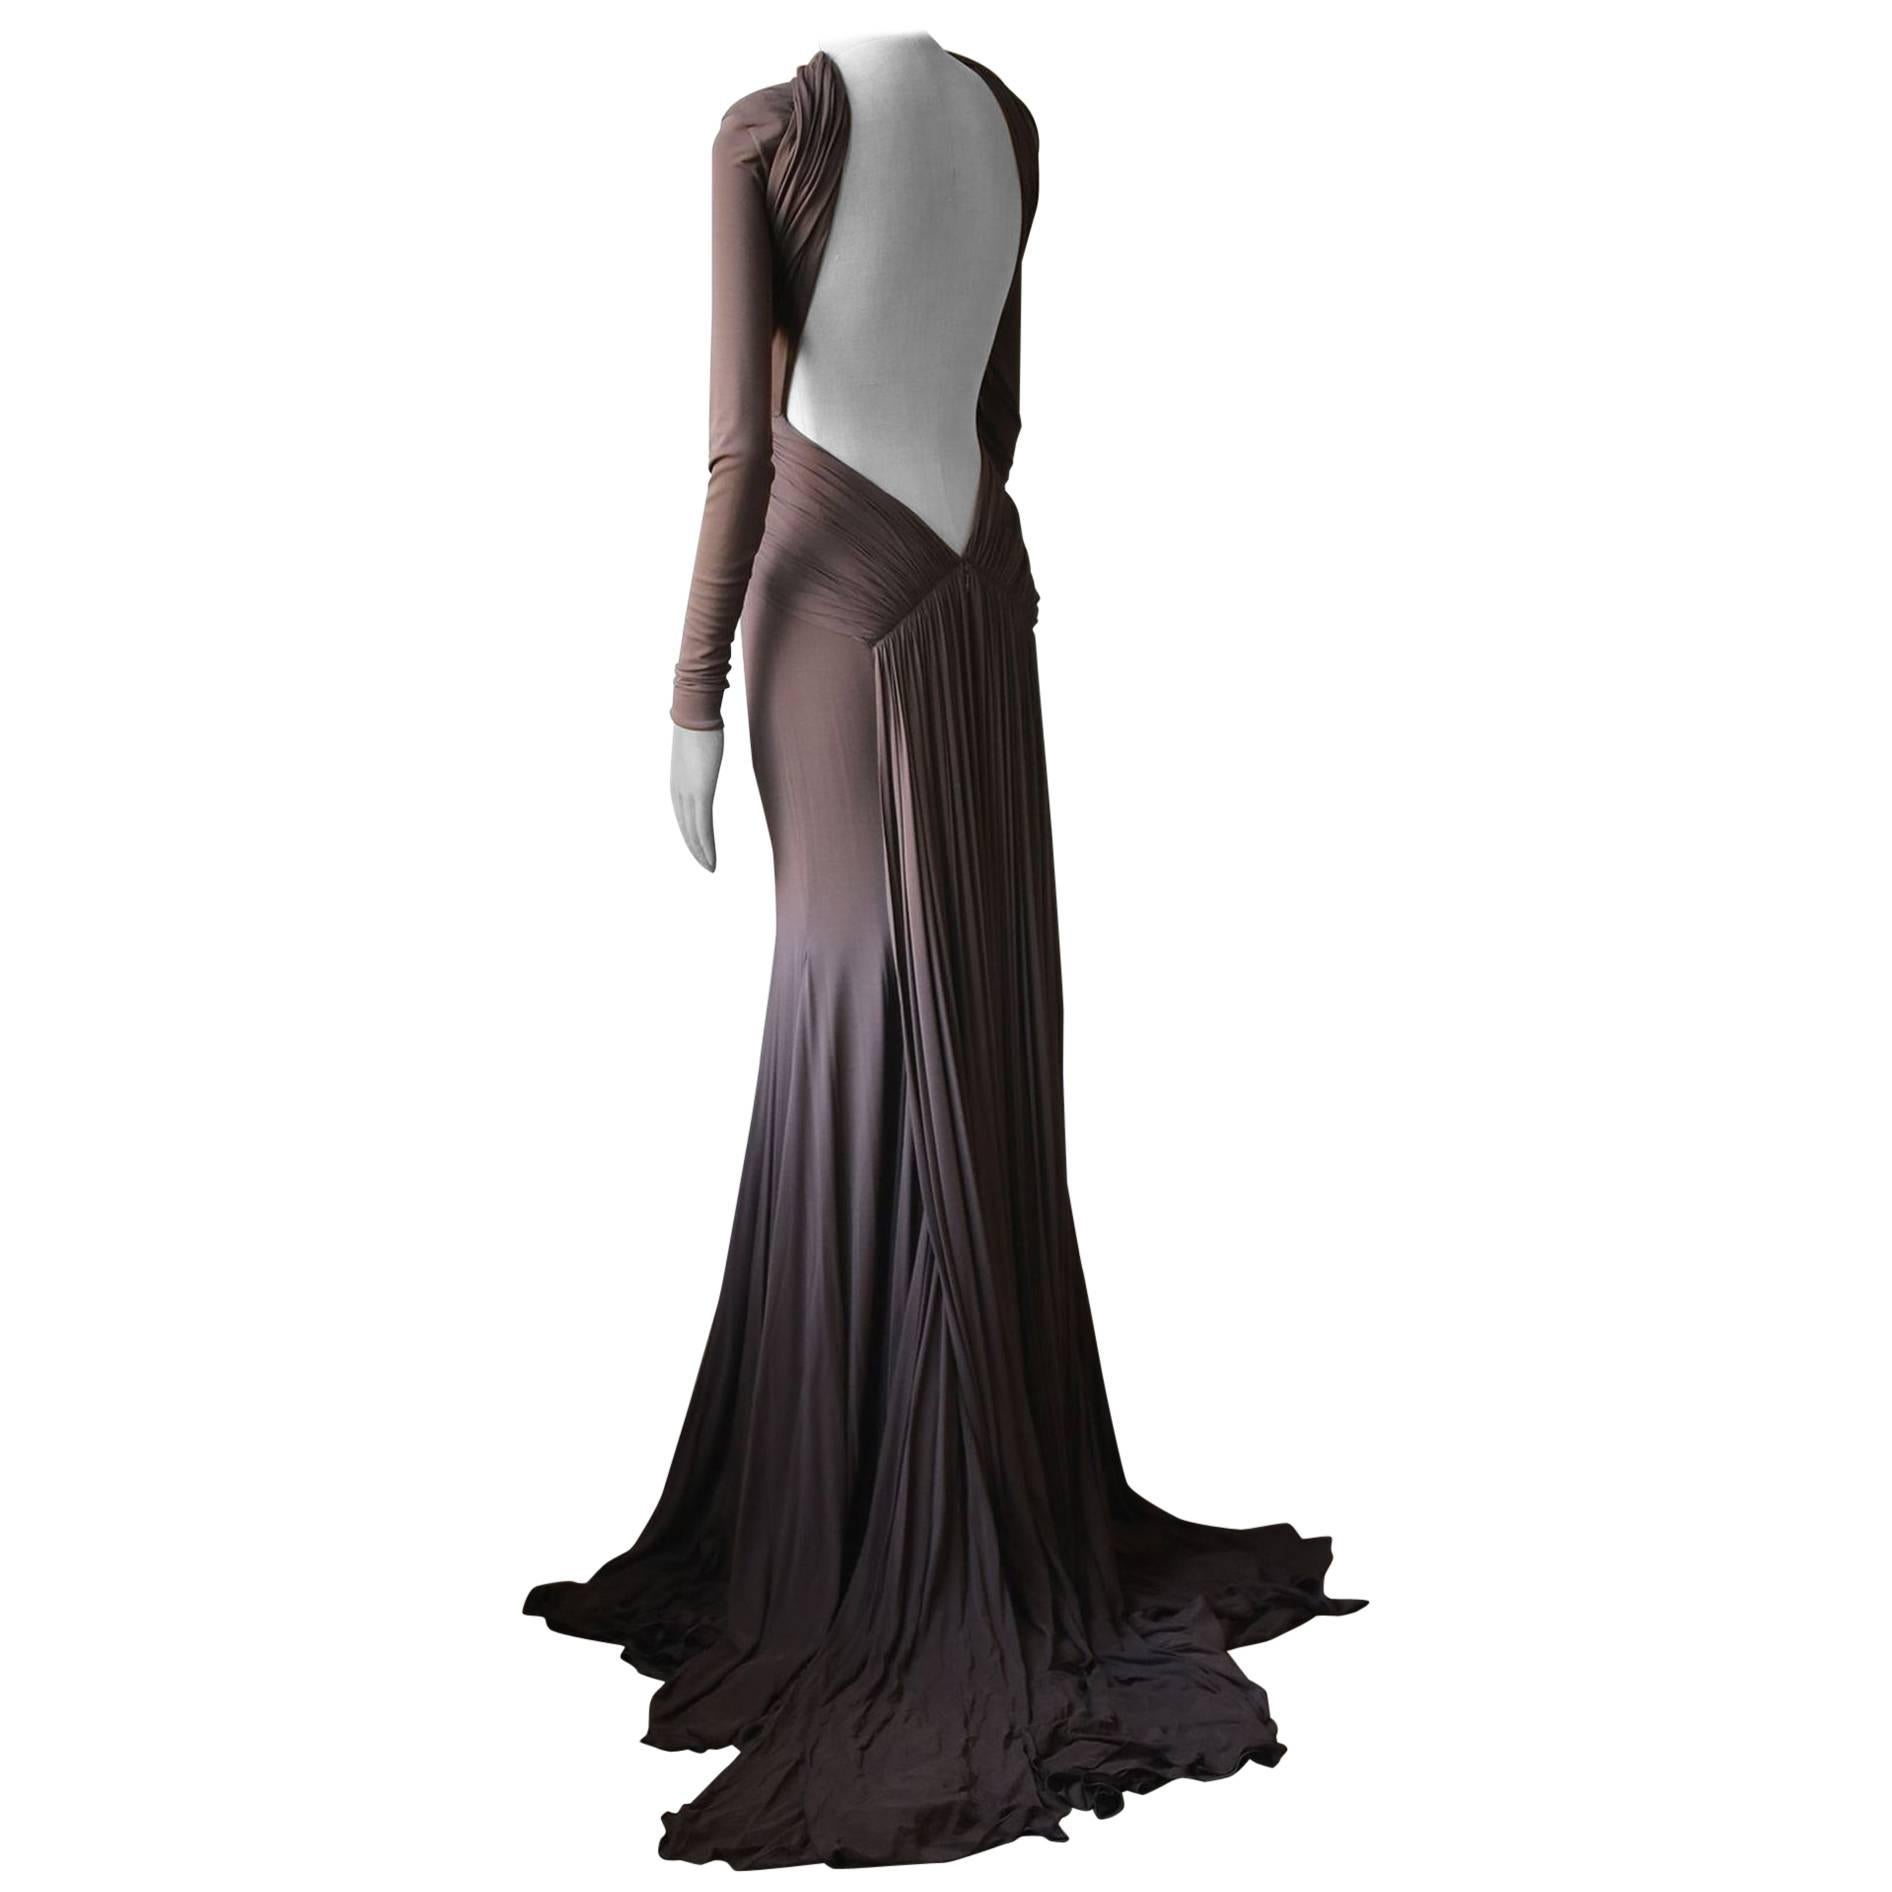 Guy Laroche by Herve L. Leroux Long-Sleeve Backless Gown